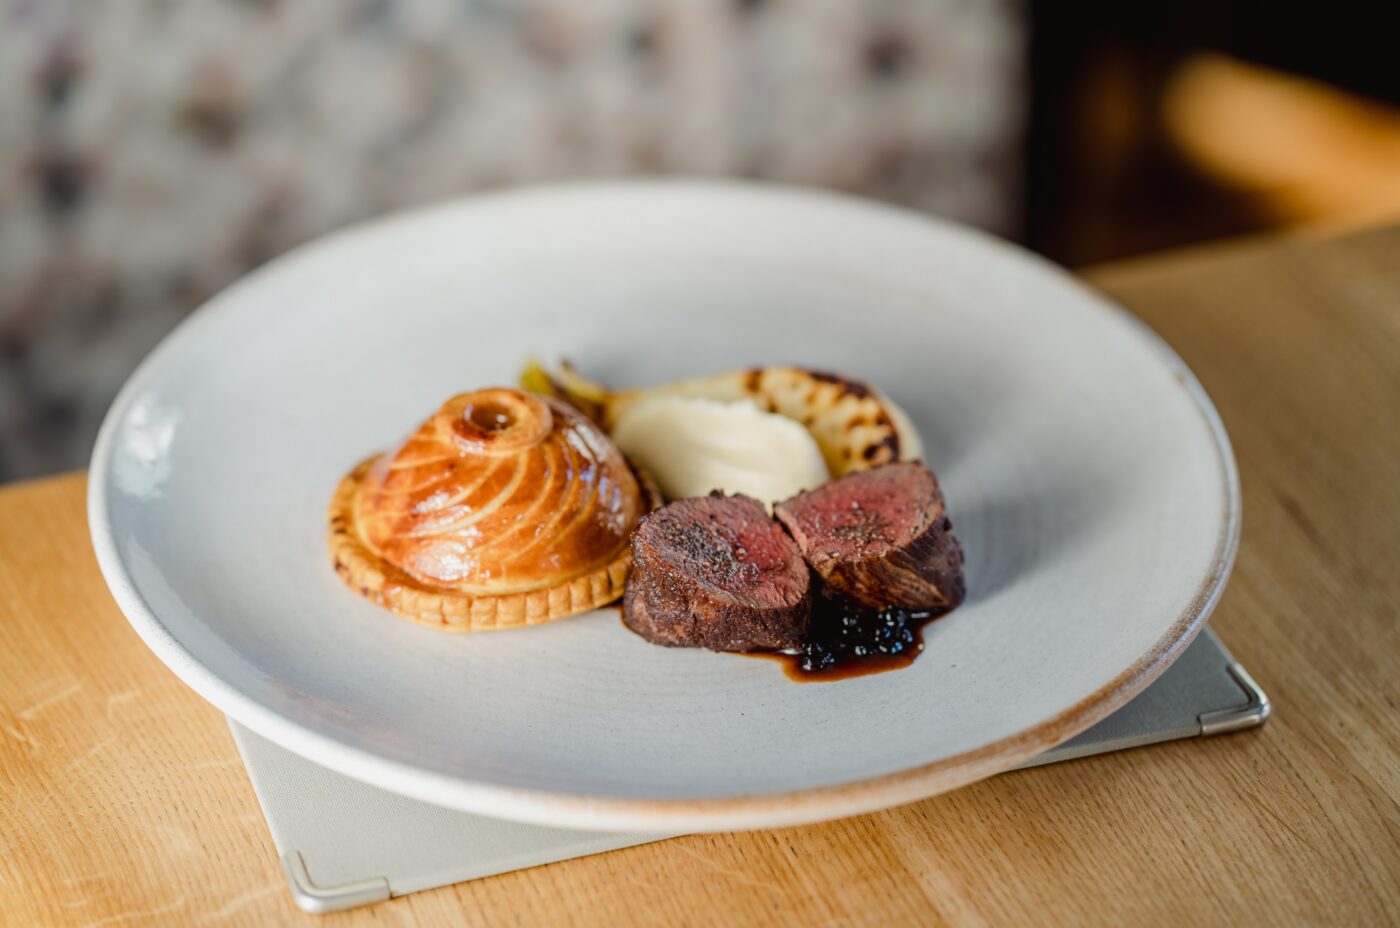 Pithivie of Castle game Sika deer roasted loin at Kora by Tom Kitchin.